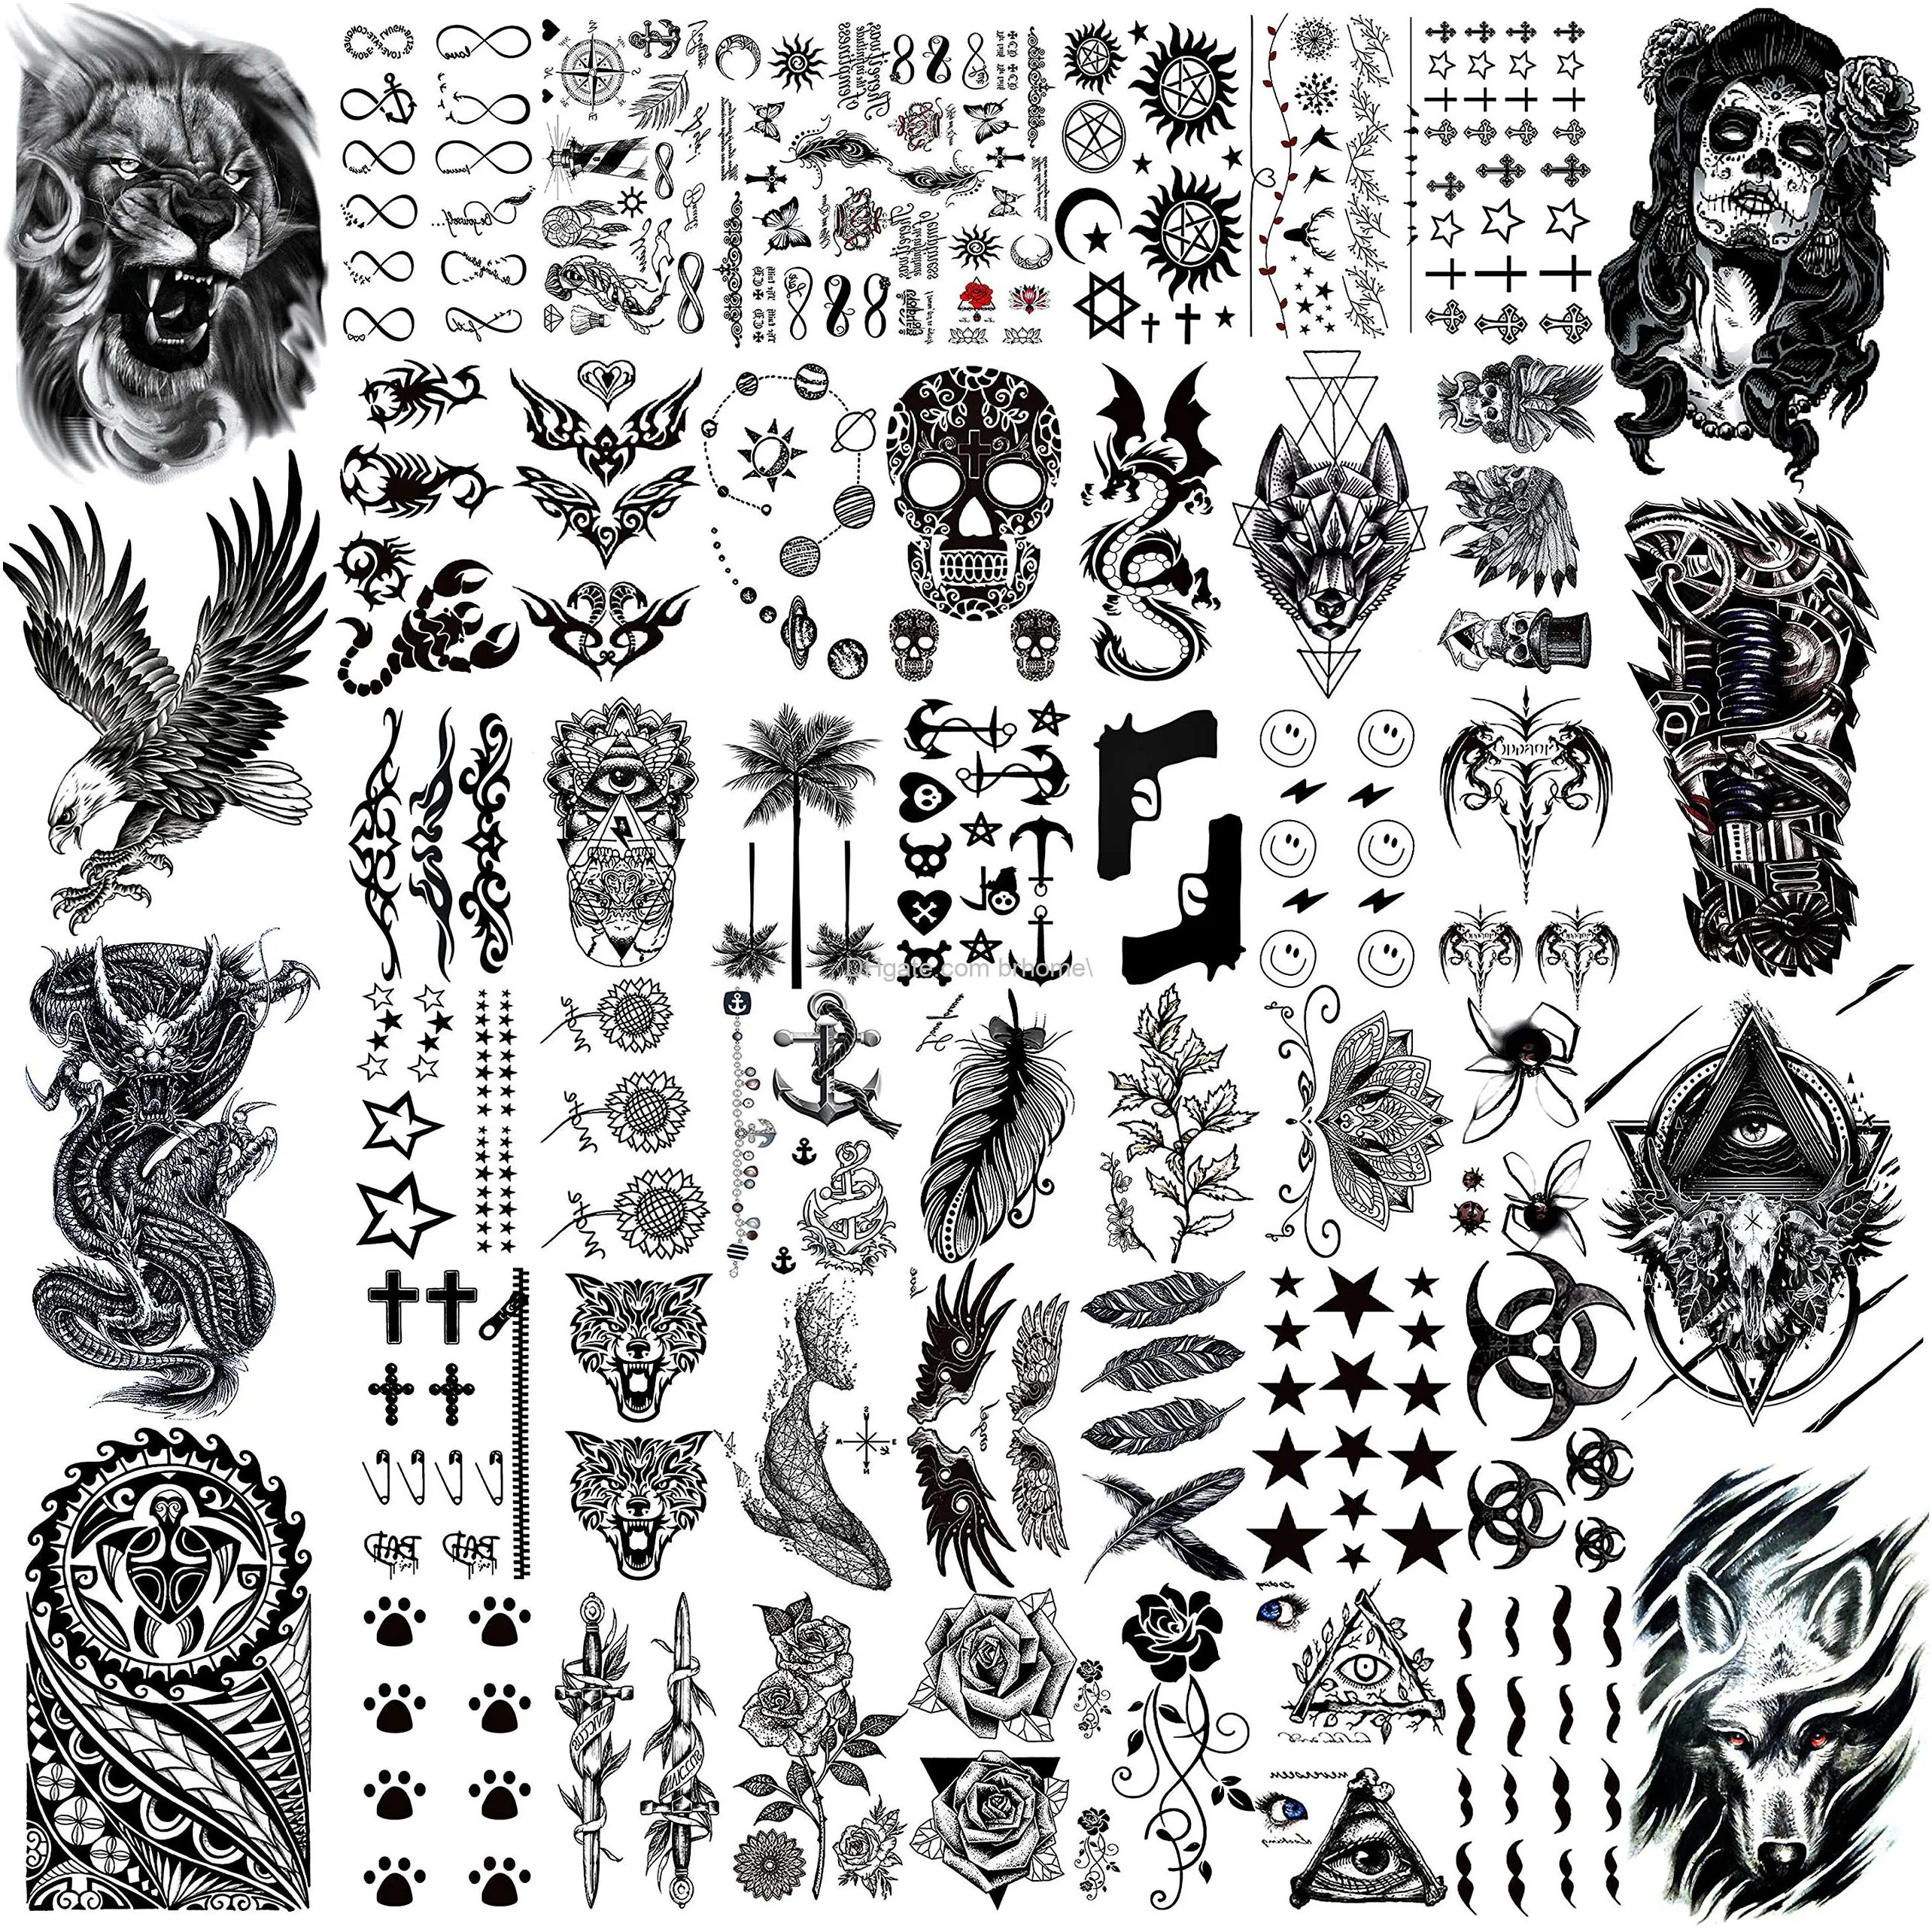 66 sheets 3d small black temporary tattoos for women men waterproof fake tattoo stickers for face neck arm children tattoo temporary flower birds star realistic tatoo kits for boy girls adults